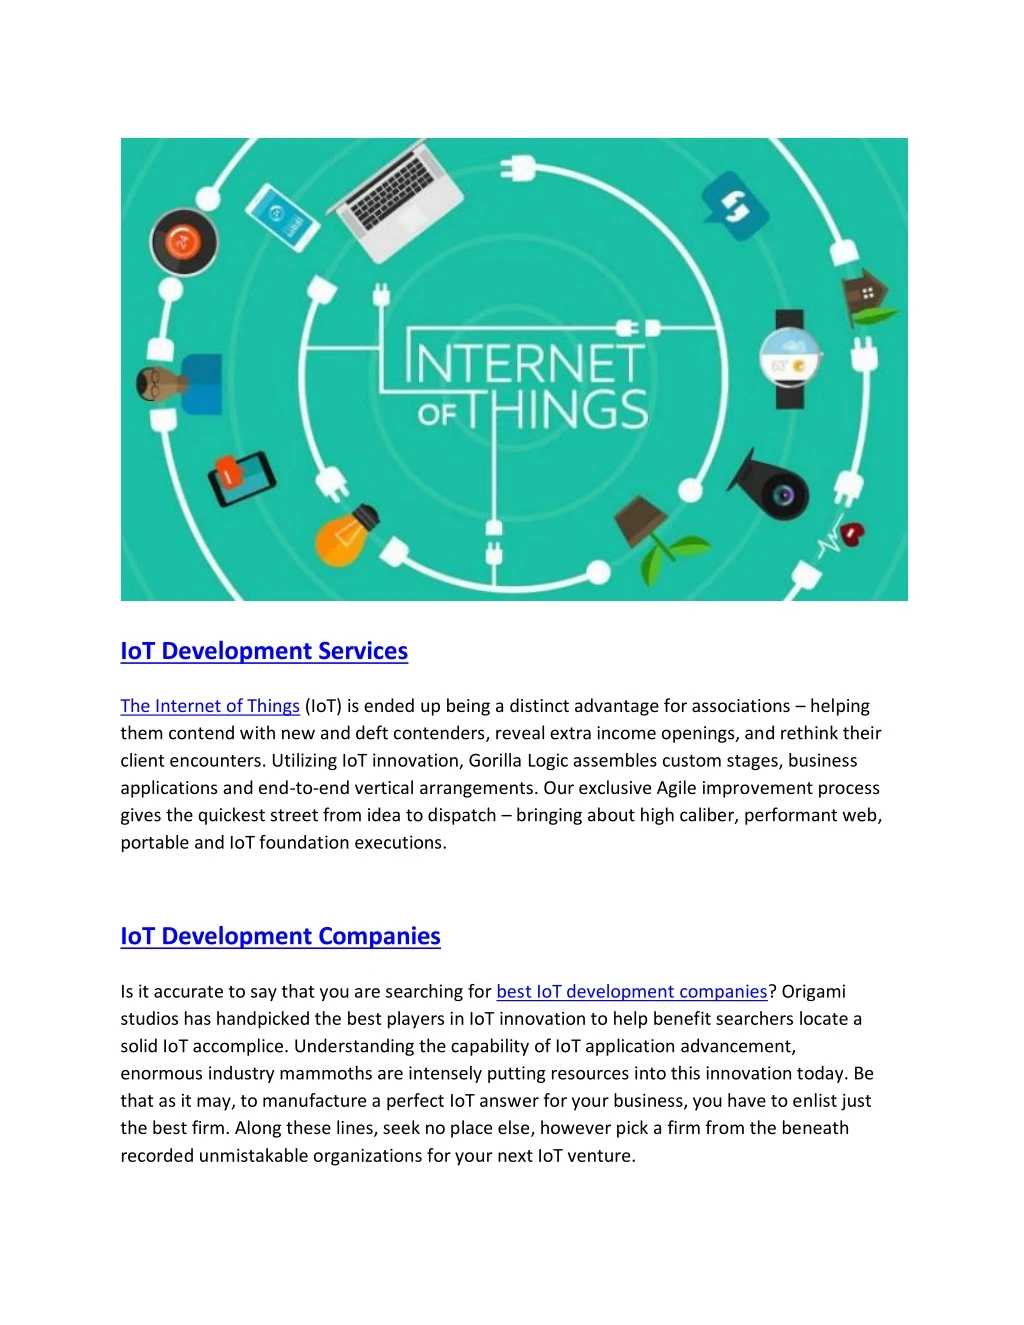 iot development services the internet of things